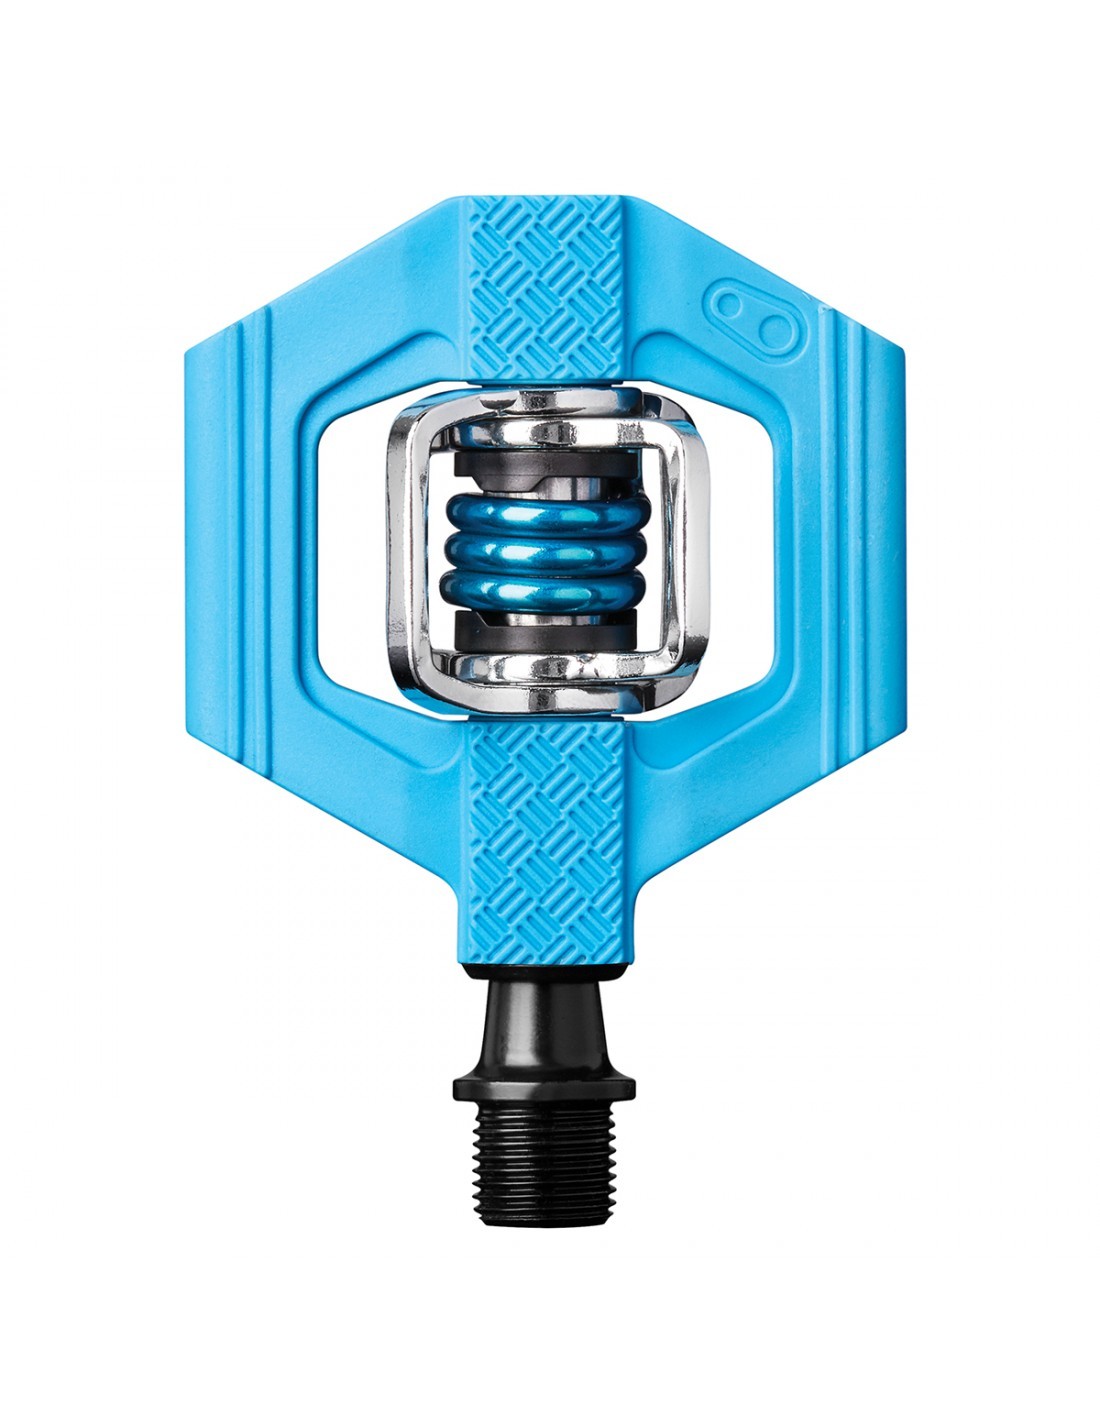 PEDAL CRANKBROTHERS CANDY 1 - AZUL